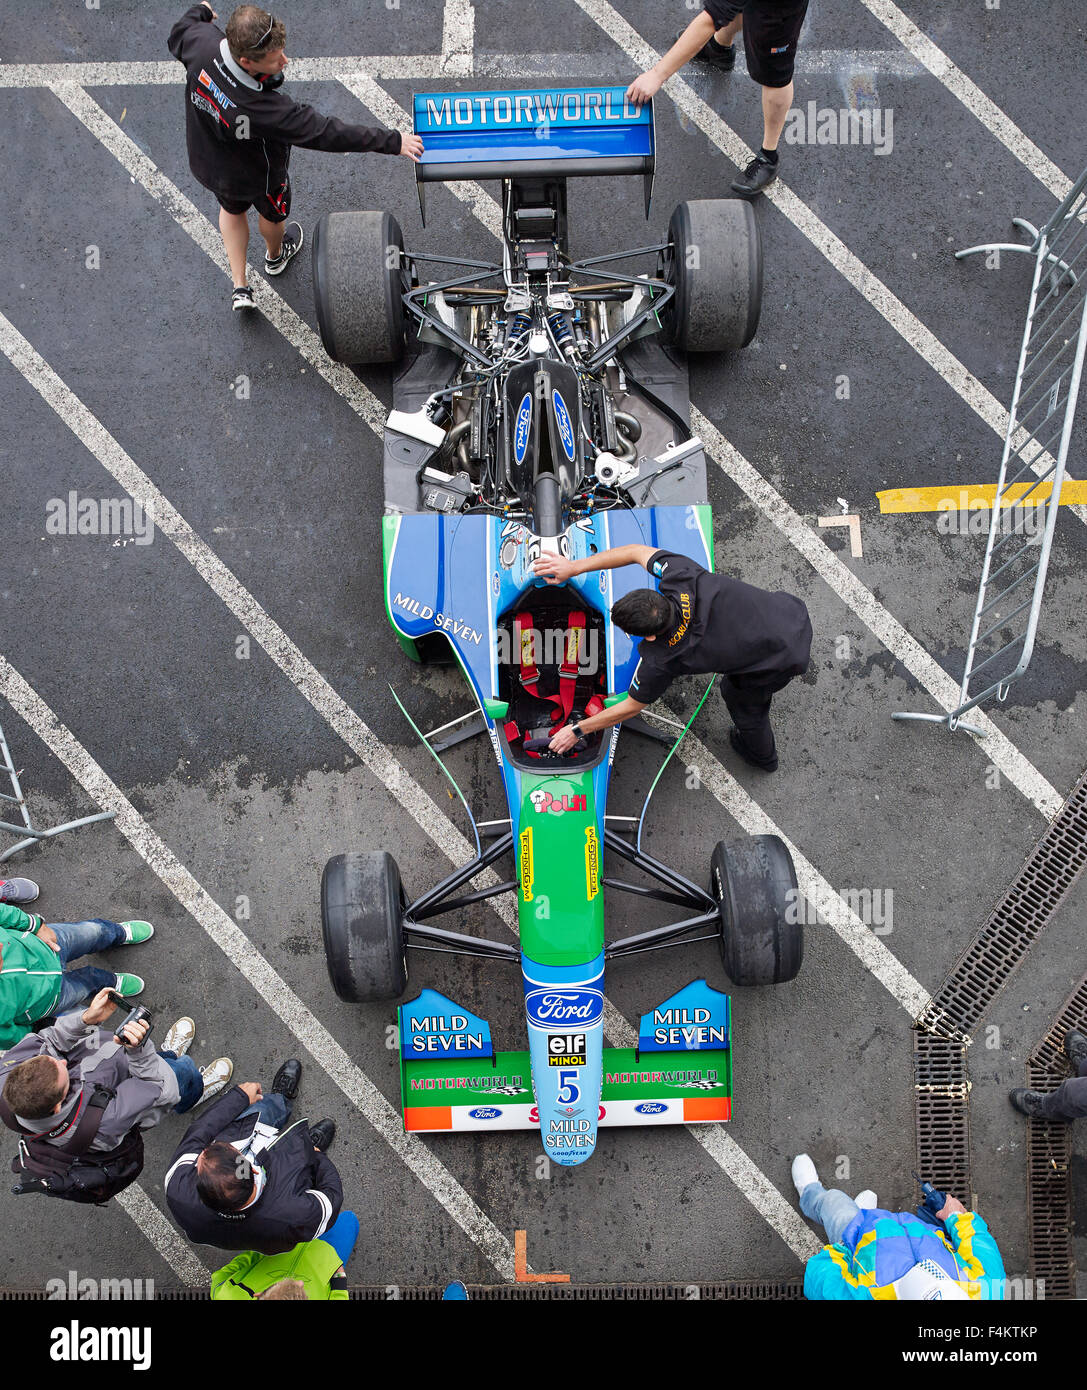 Benetton Ford High Resolution Stock Photography and Images - Alamy